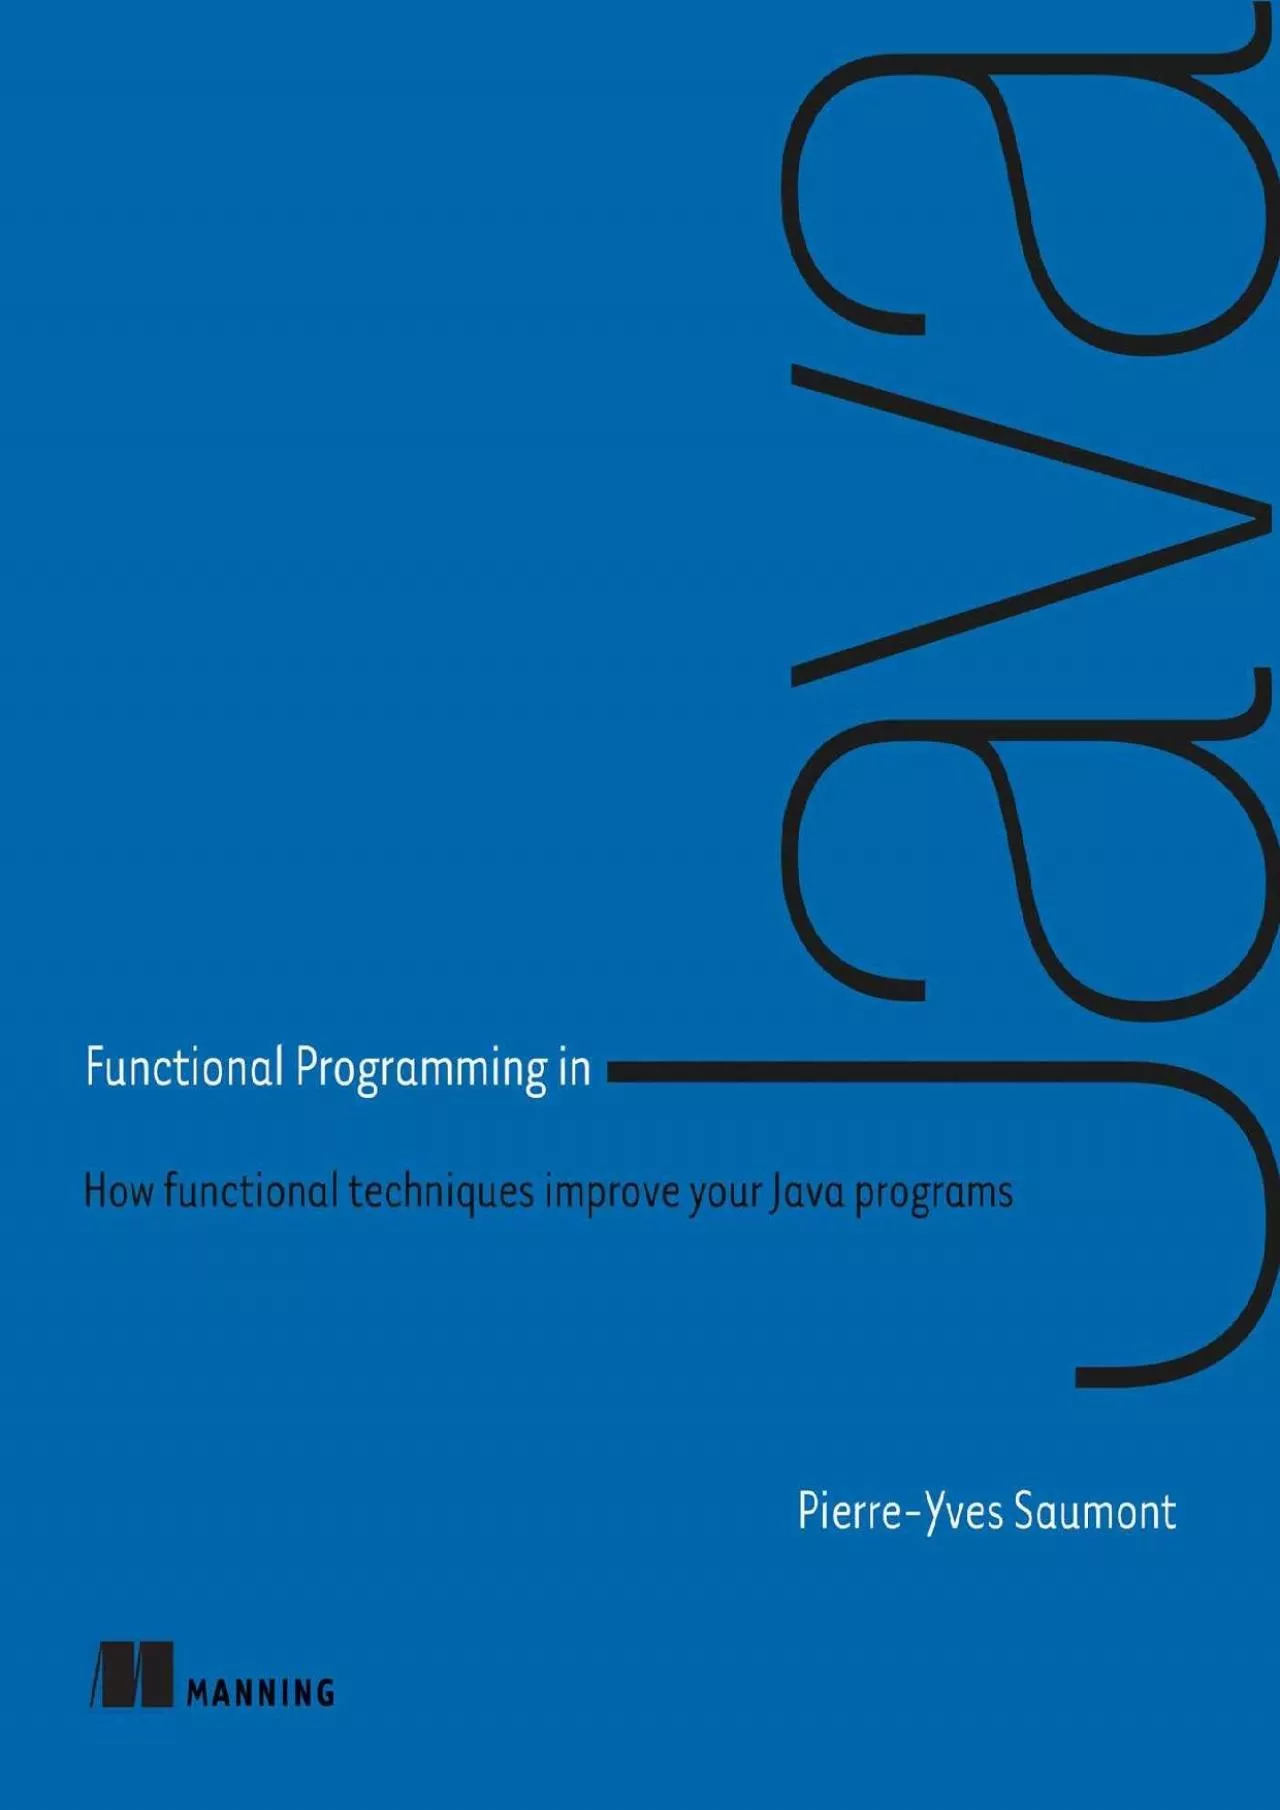 [READING BOOK]-Functional Programming in Java: How functional techniques improve your